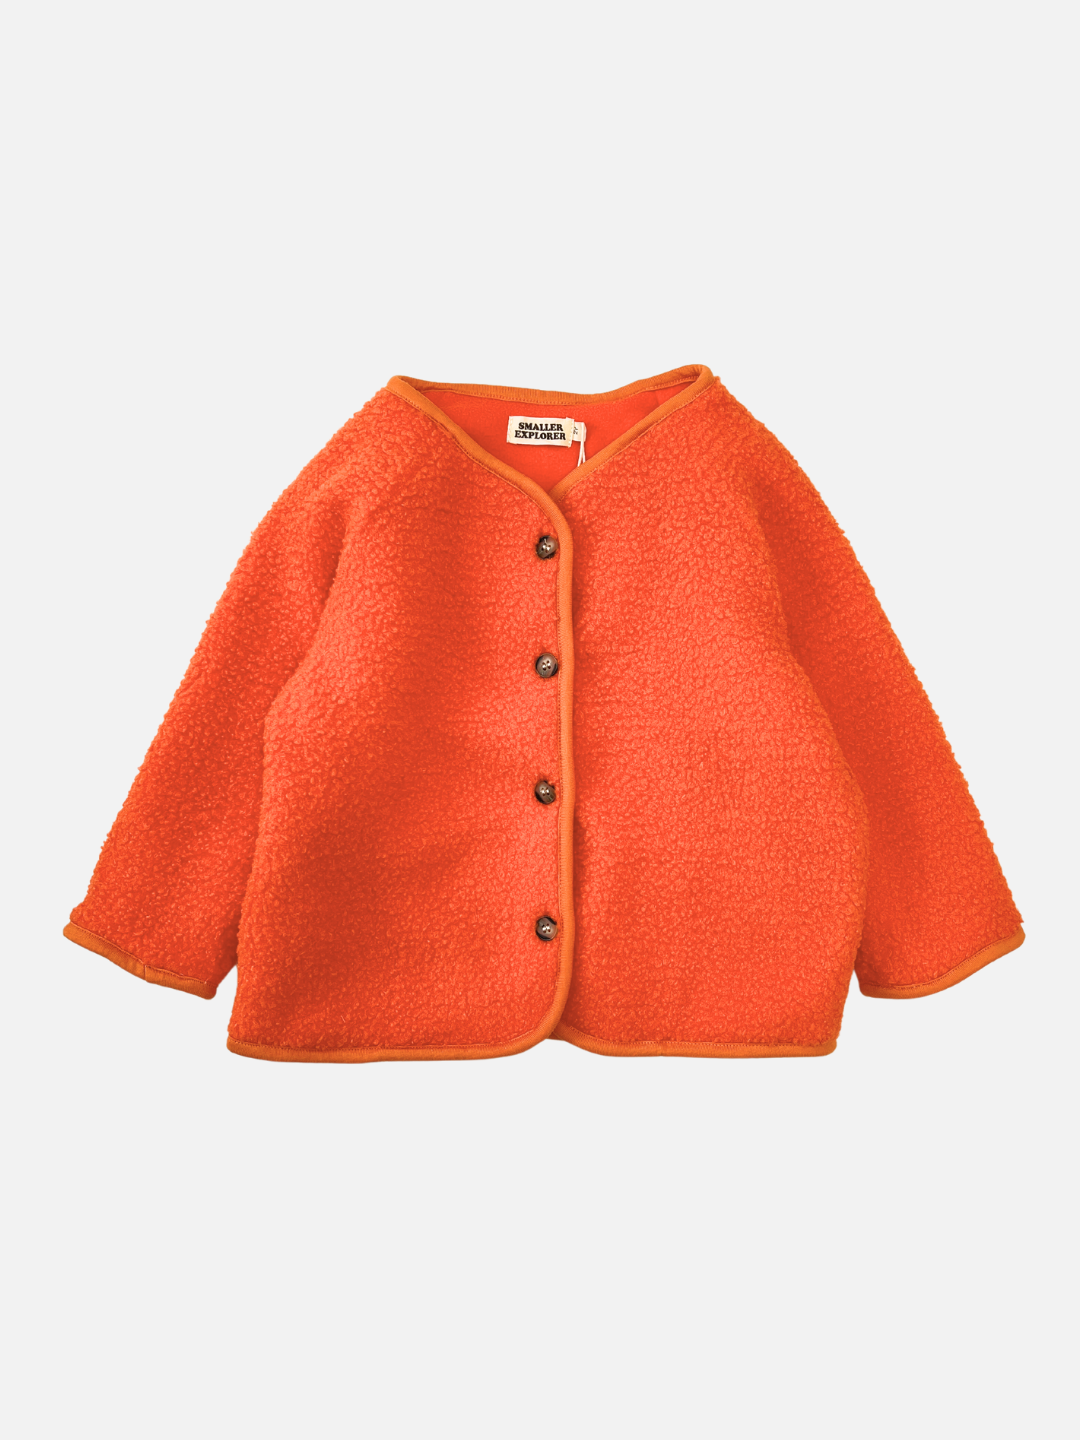 Front view of a kids orange collarless fleece jacket with four brown buttons.